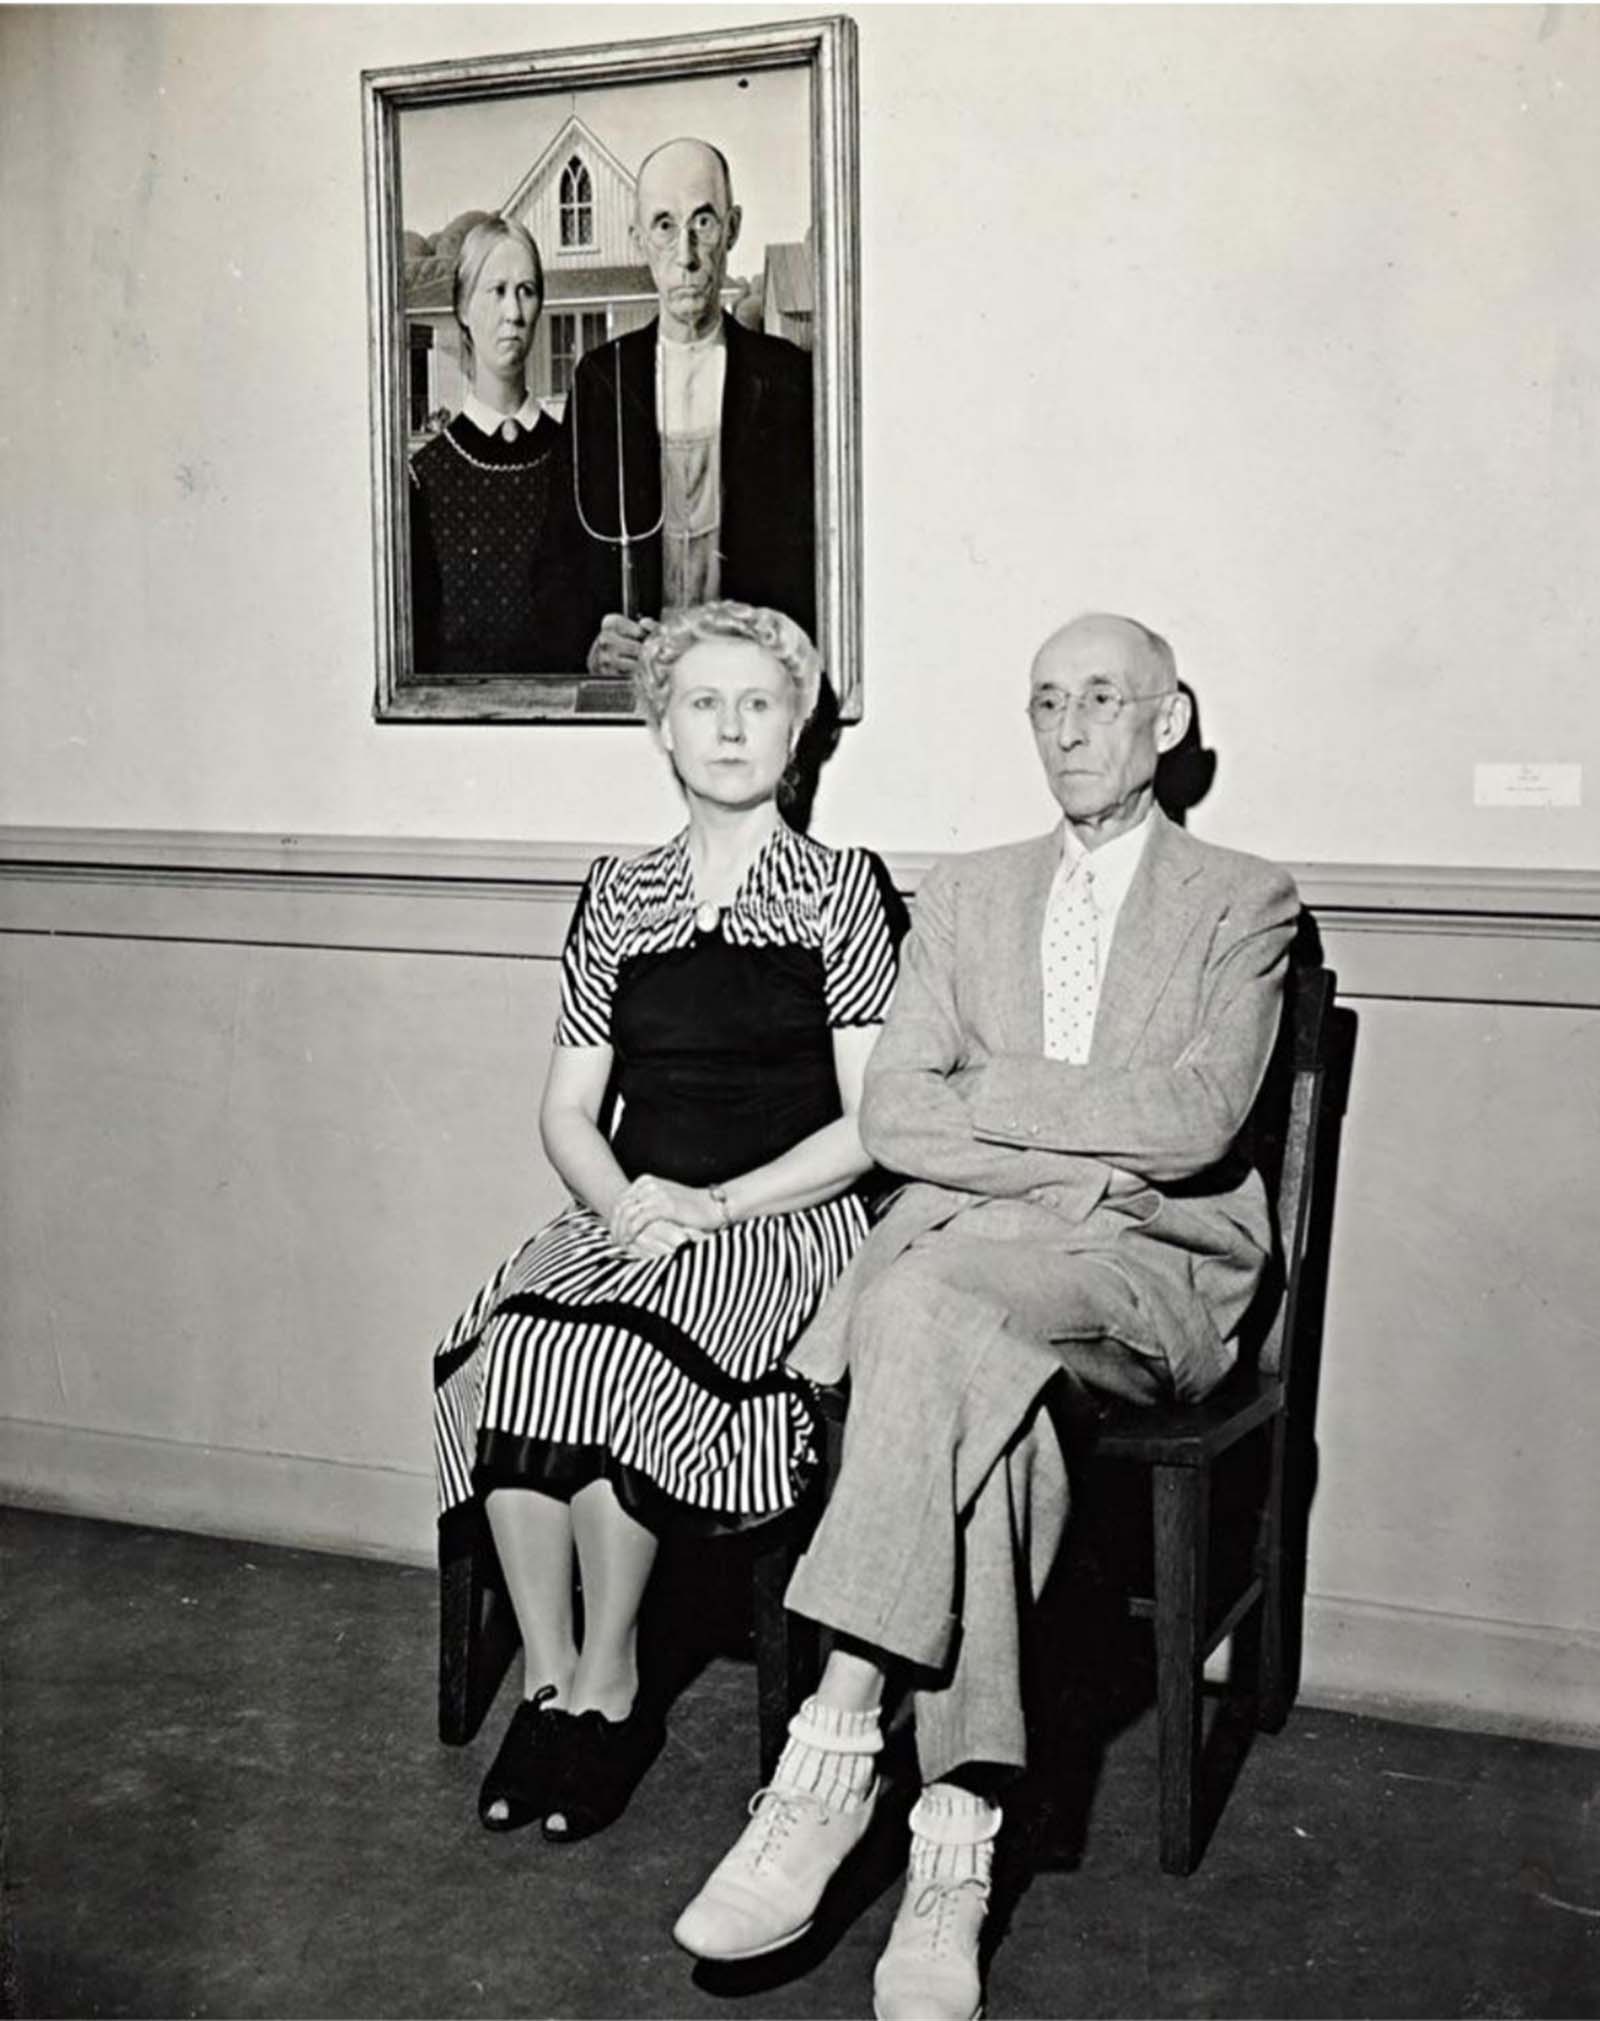 The models for ‘American Gothic’ pose in front of the iconic painting, 1942